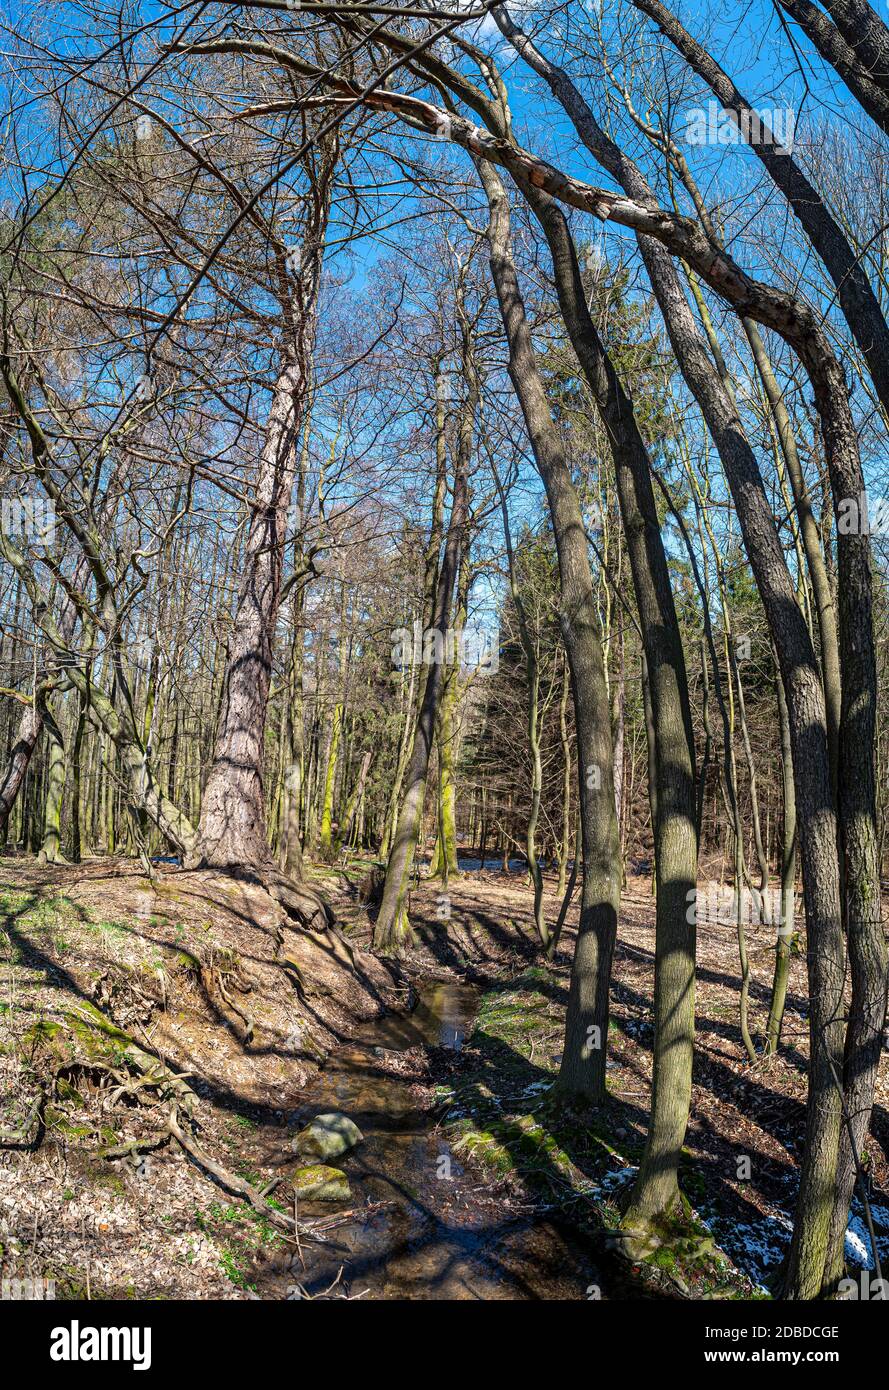 Trees in deciduous forrest in the early spring still without leaves, shadows of the bare branches on the ground, blue sky above them Stock Photo